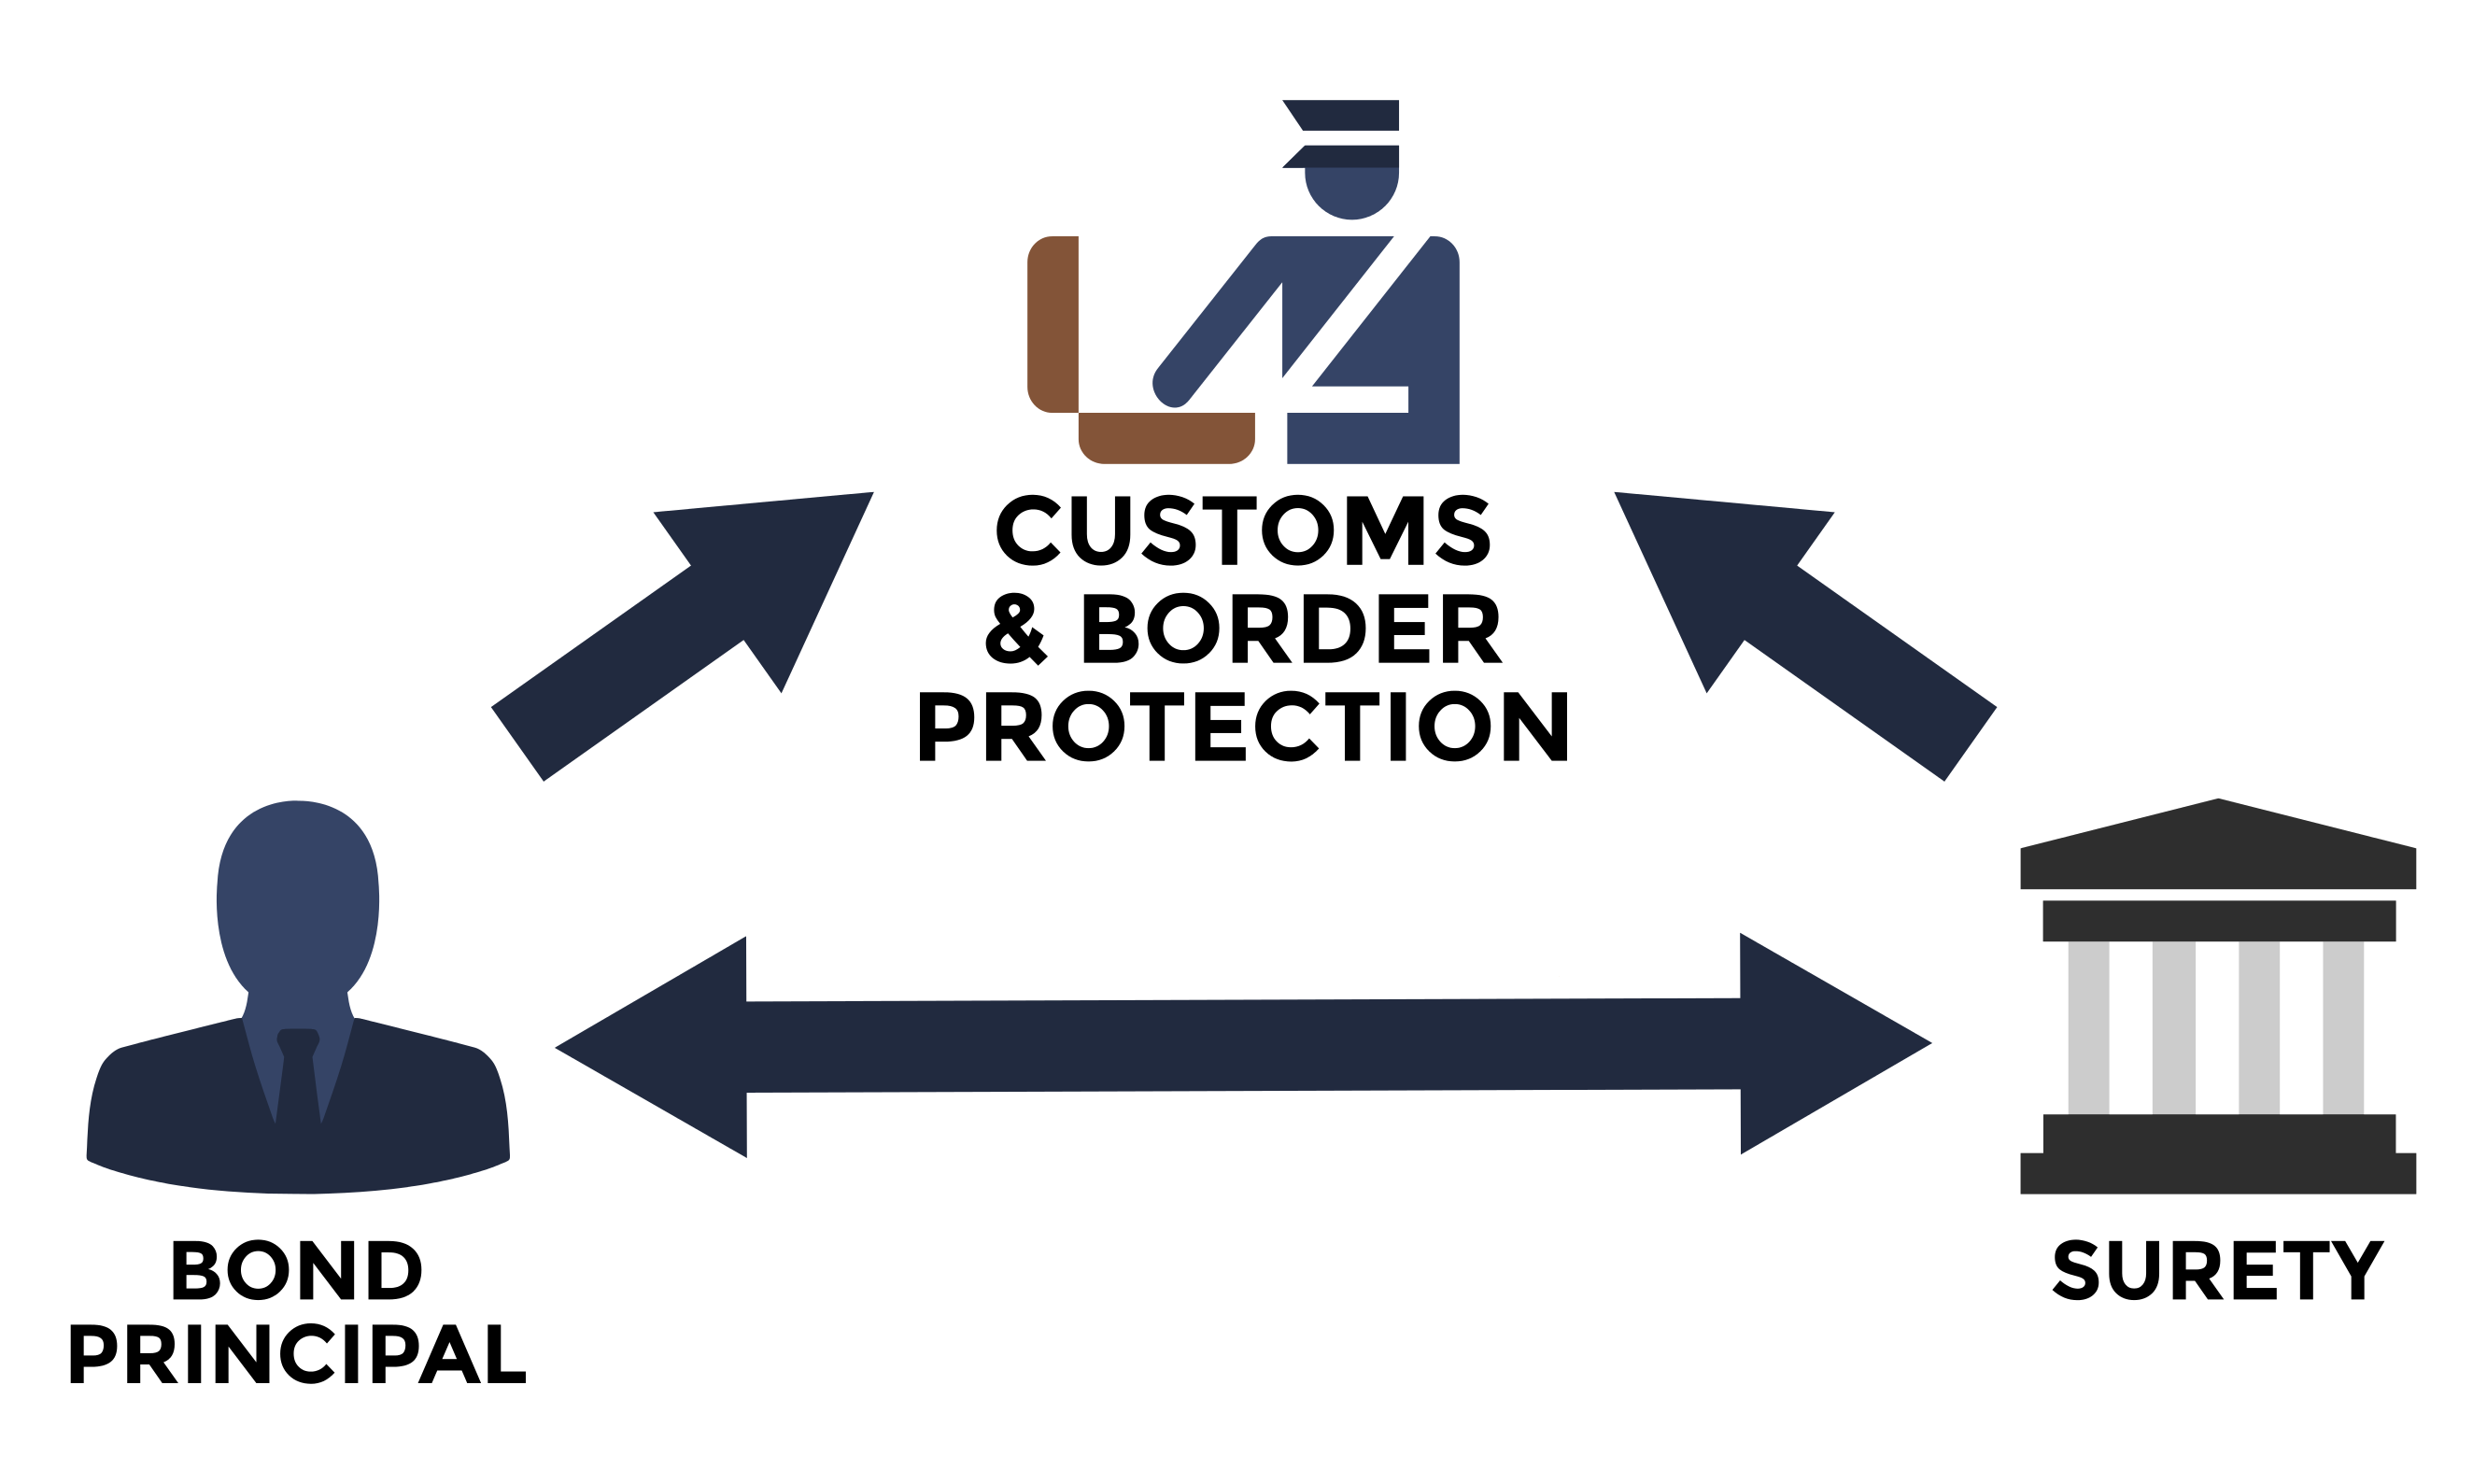 A U.S. Customs Import Bond is a Three-Party contract between the importer, the Surety, and Customs and Border Protection.